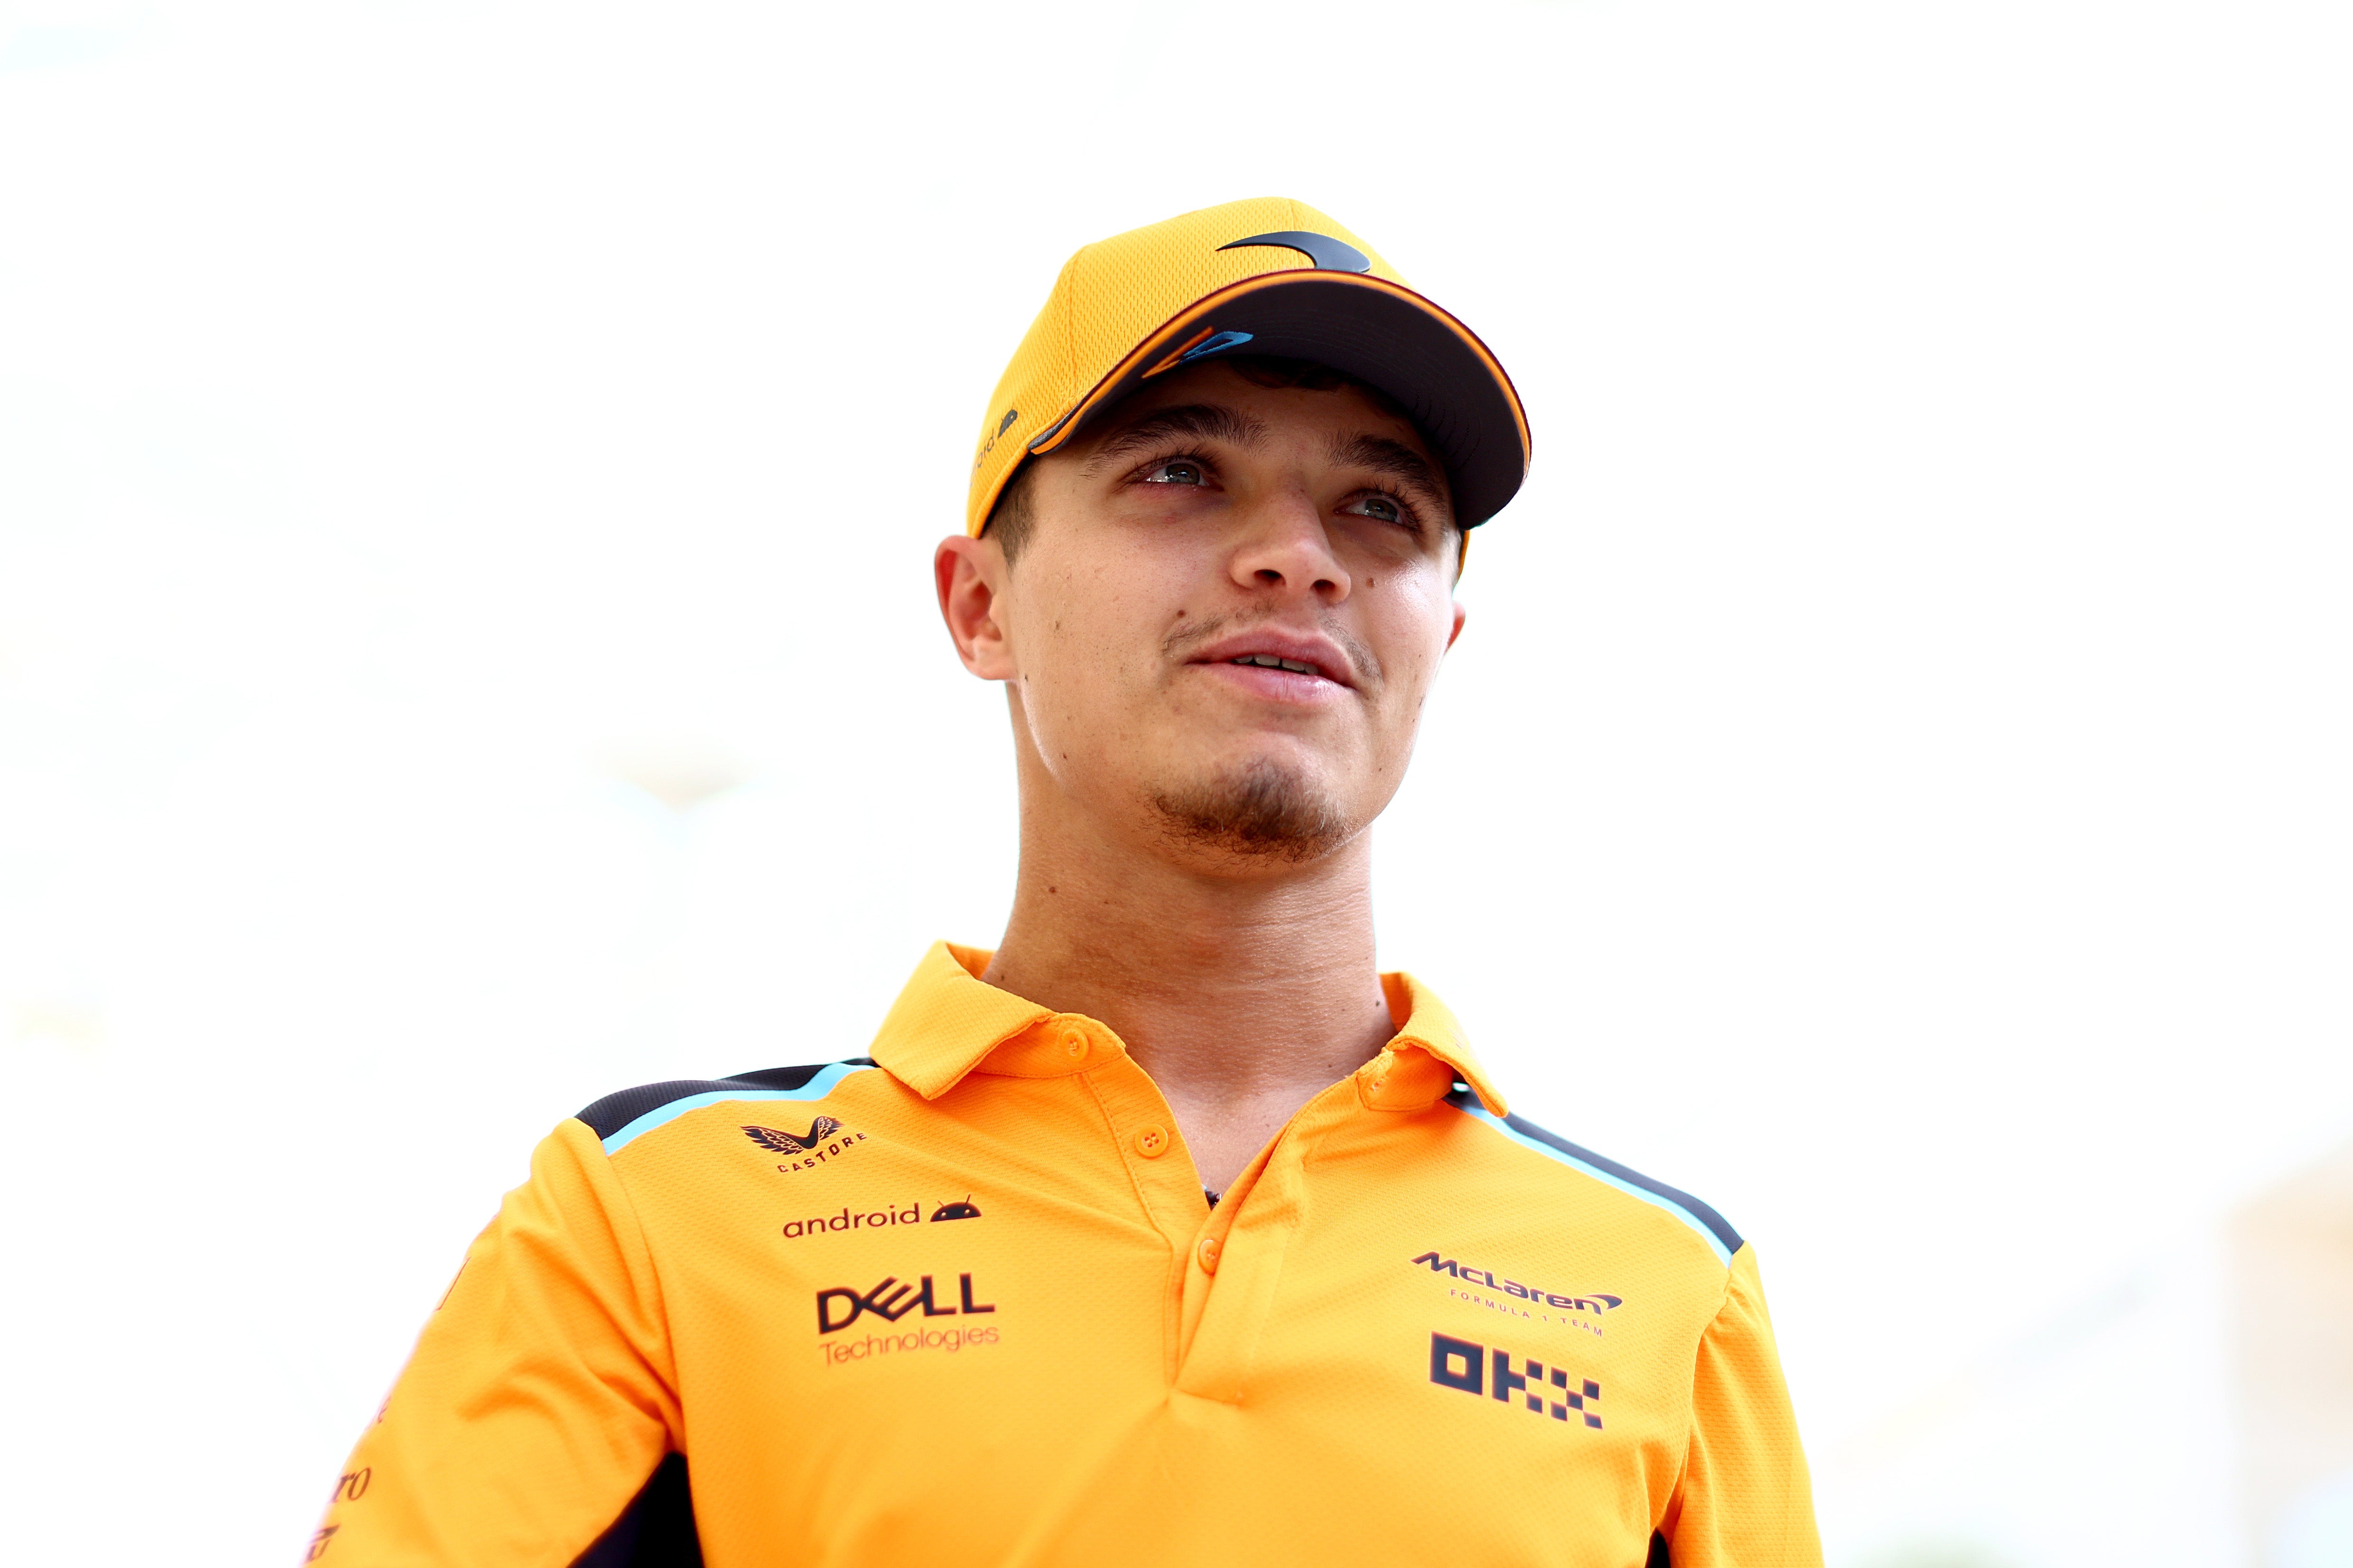 Lando Norris claimed seven podiums but is still looking for his first F1 win